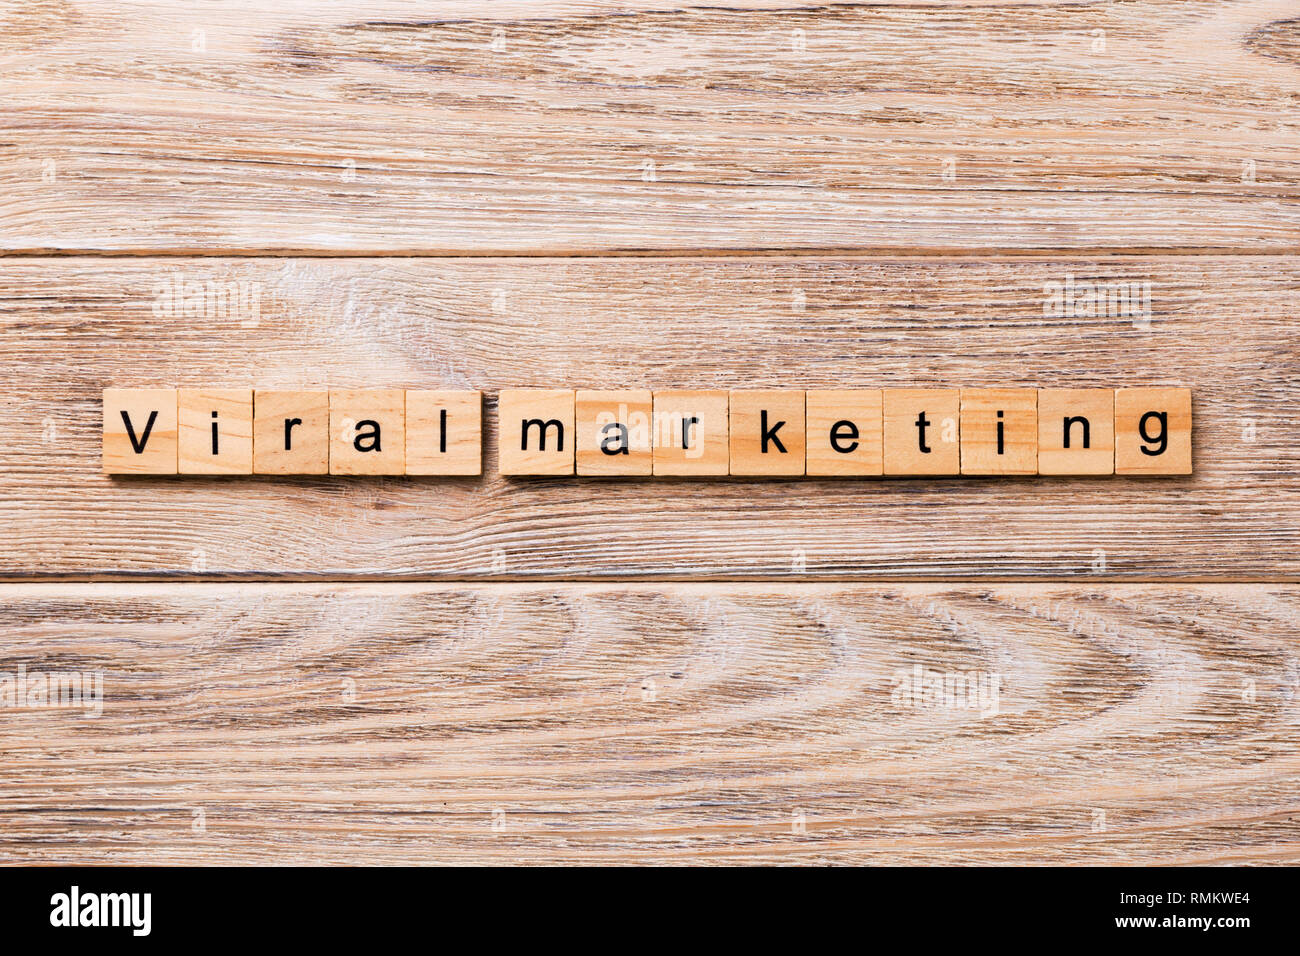 Viral markeing word written on wood block. Viral markeing text on wooden table for your desing, concept. Stock Photo